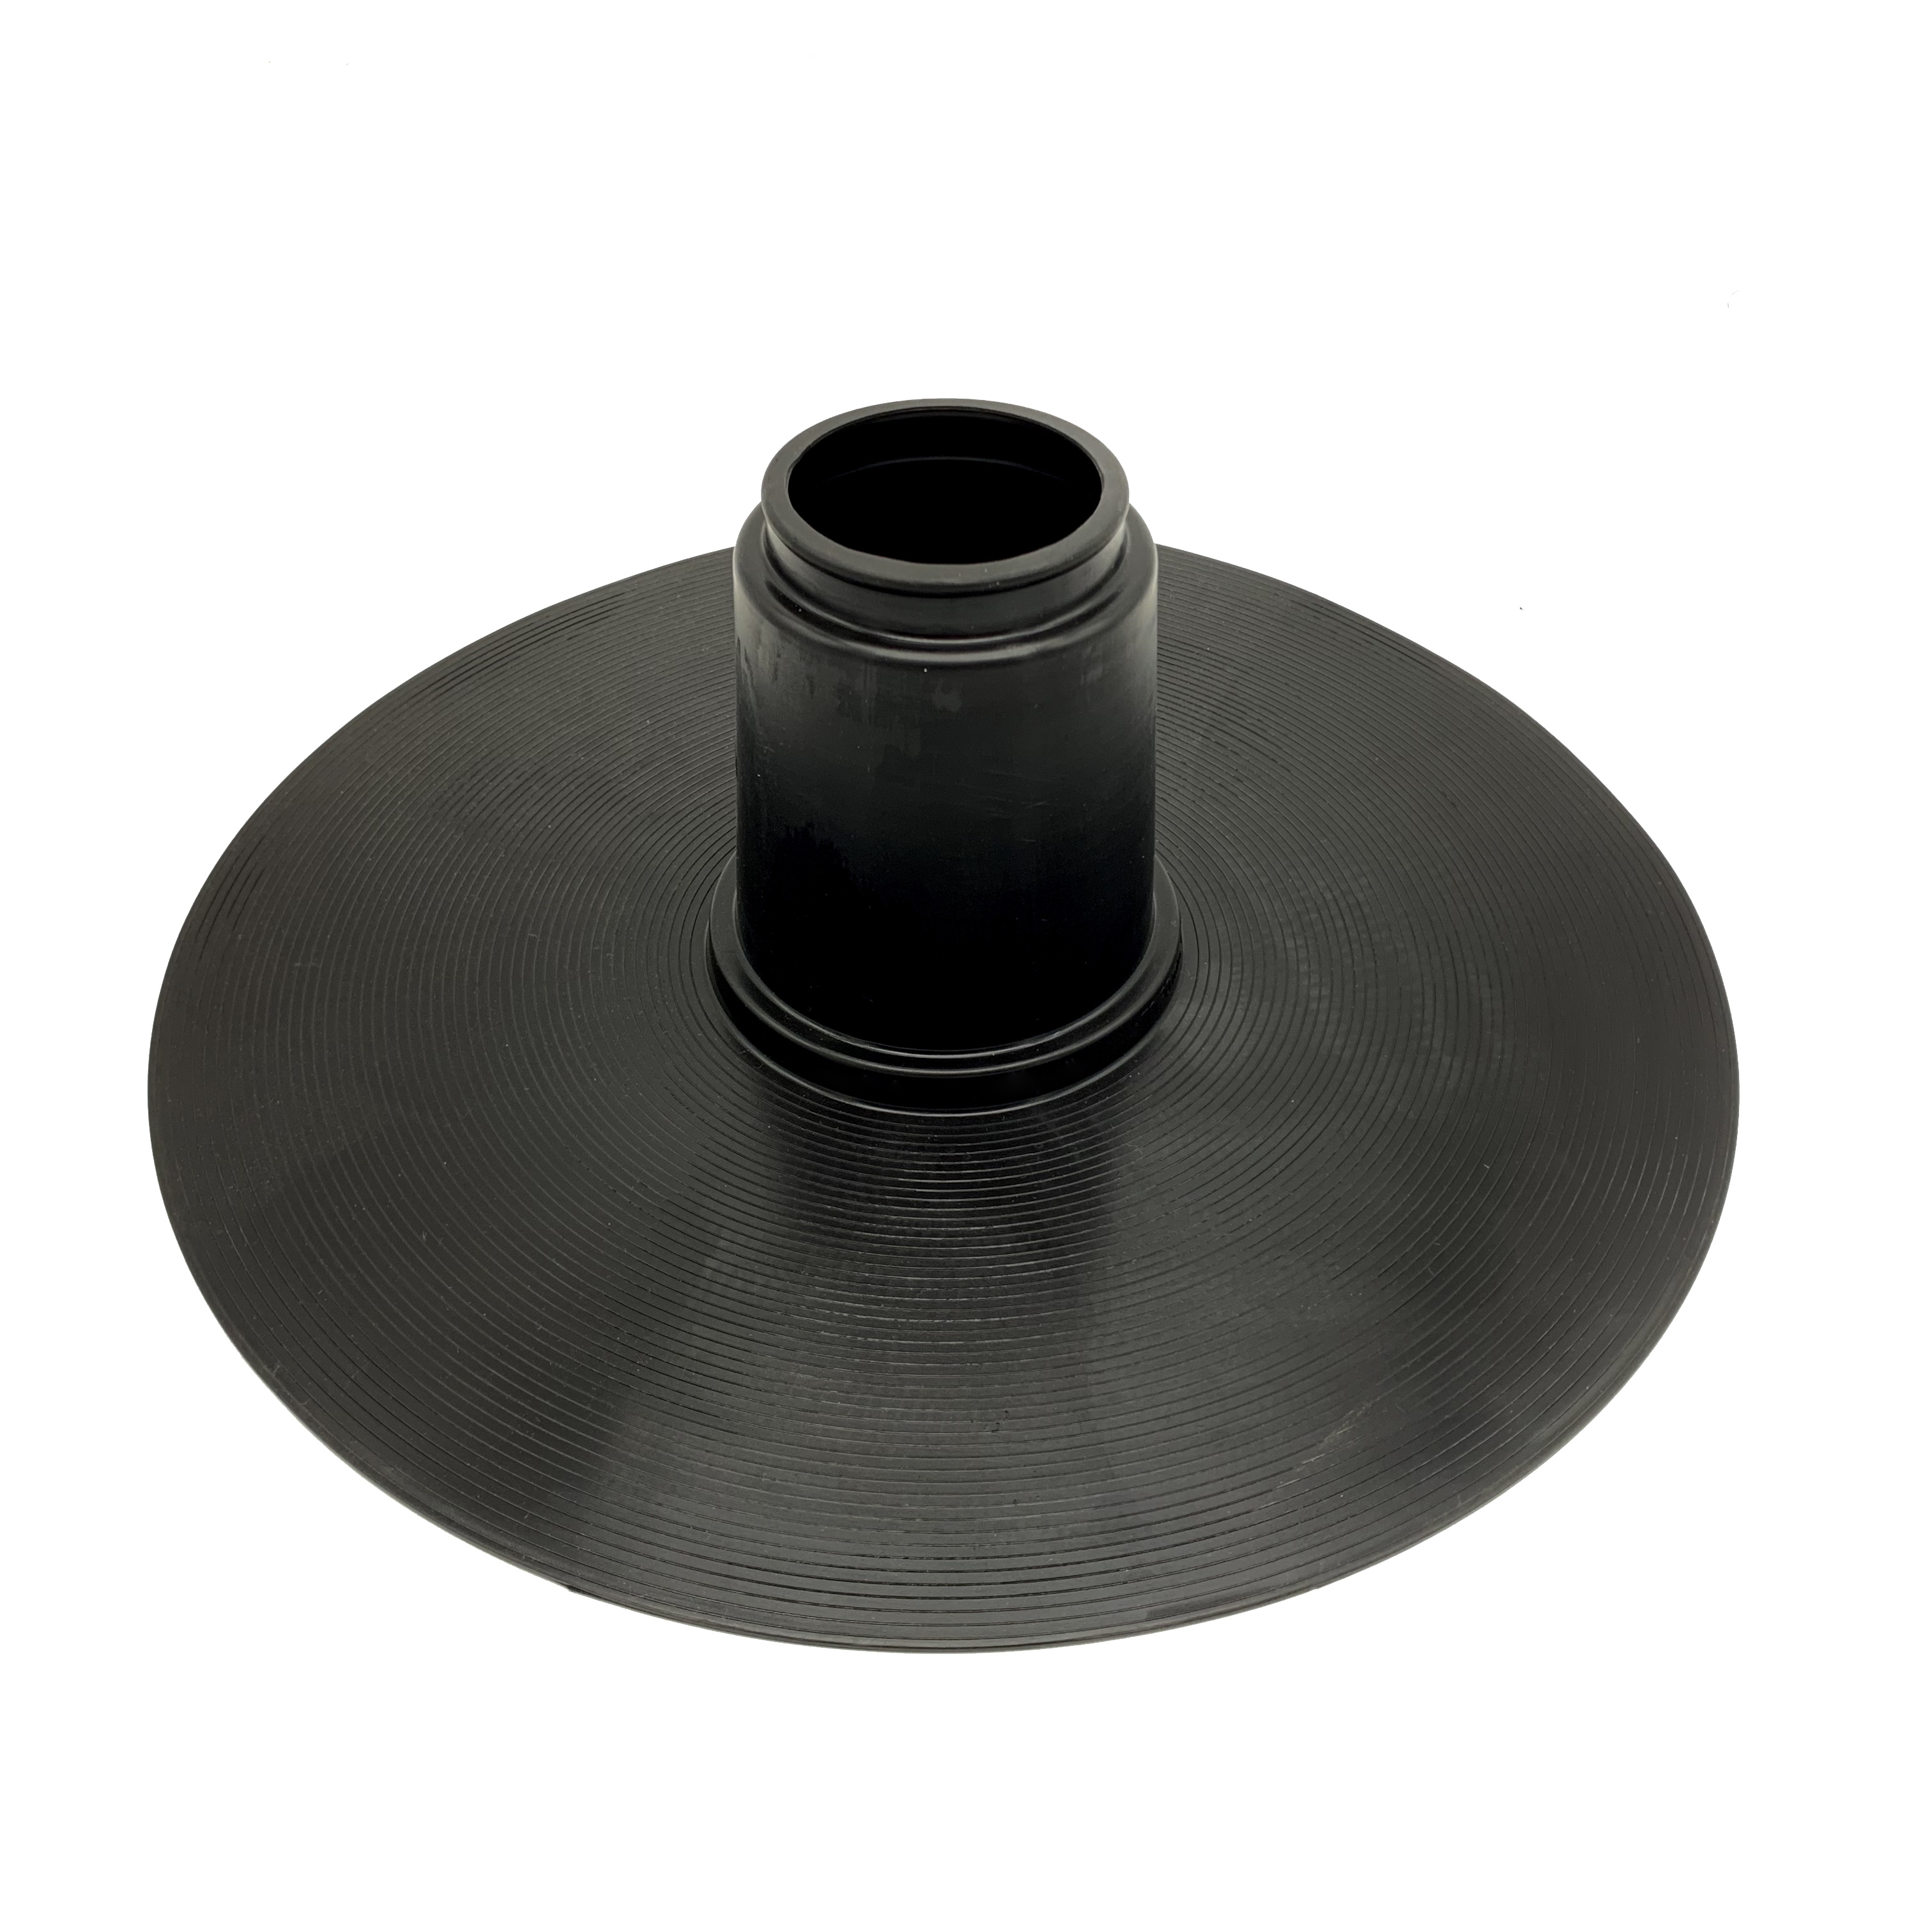 Round base 70-90mm EPDM pipe flashing for waterproofing